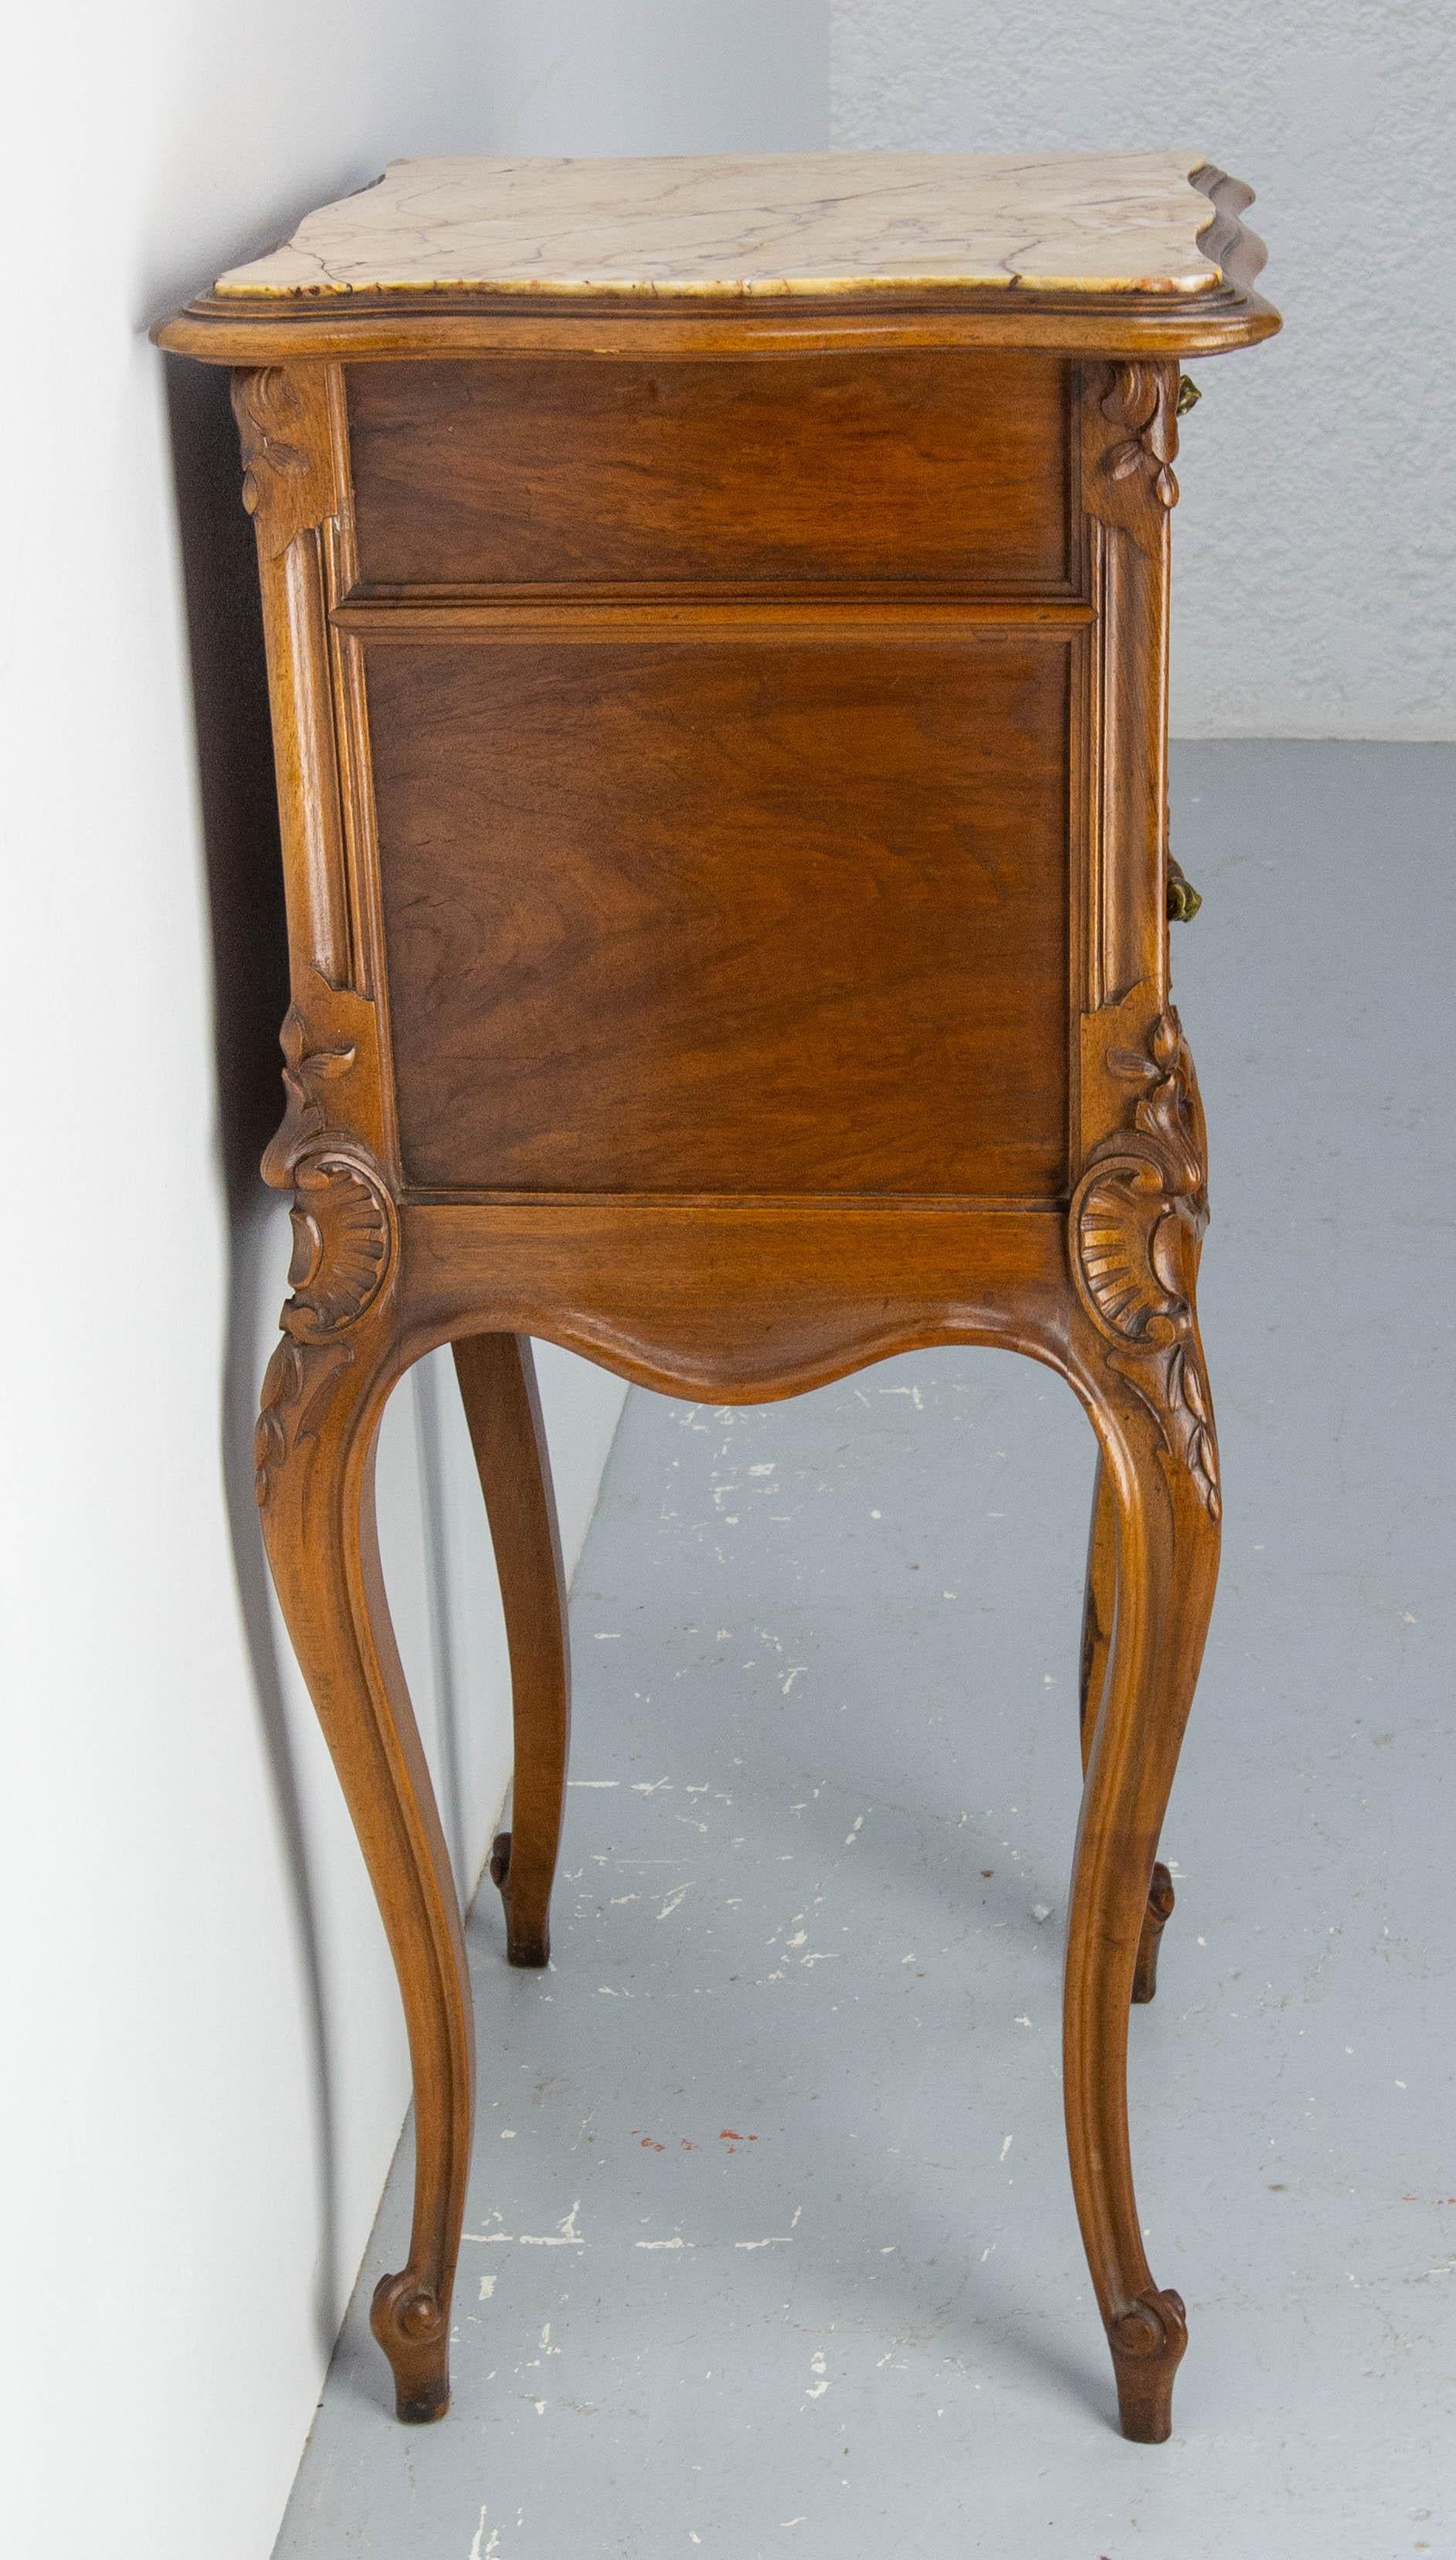 20th Century Louis XV St Side Cabinet Nightstand French Walnut Bedside Marbletop Table c 1900